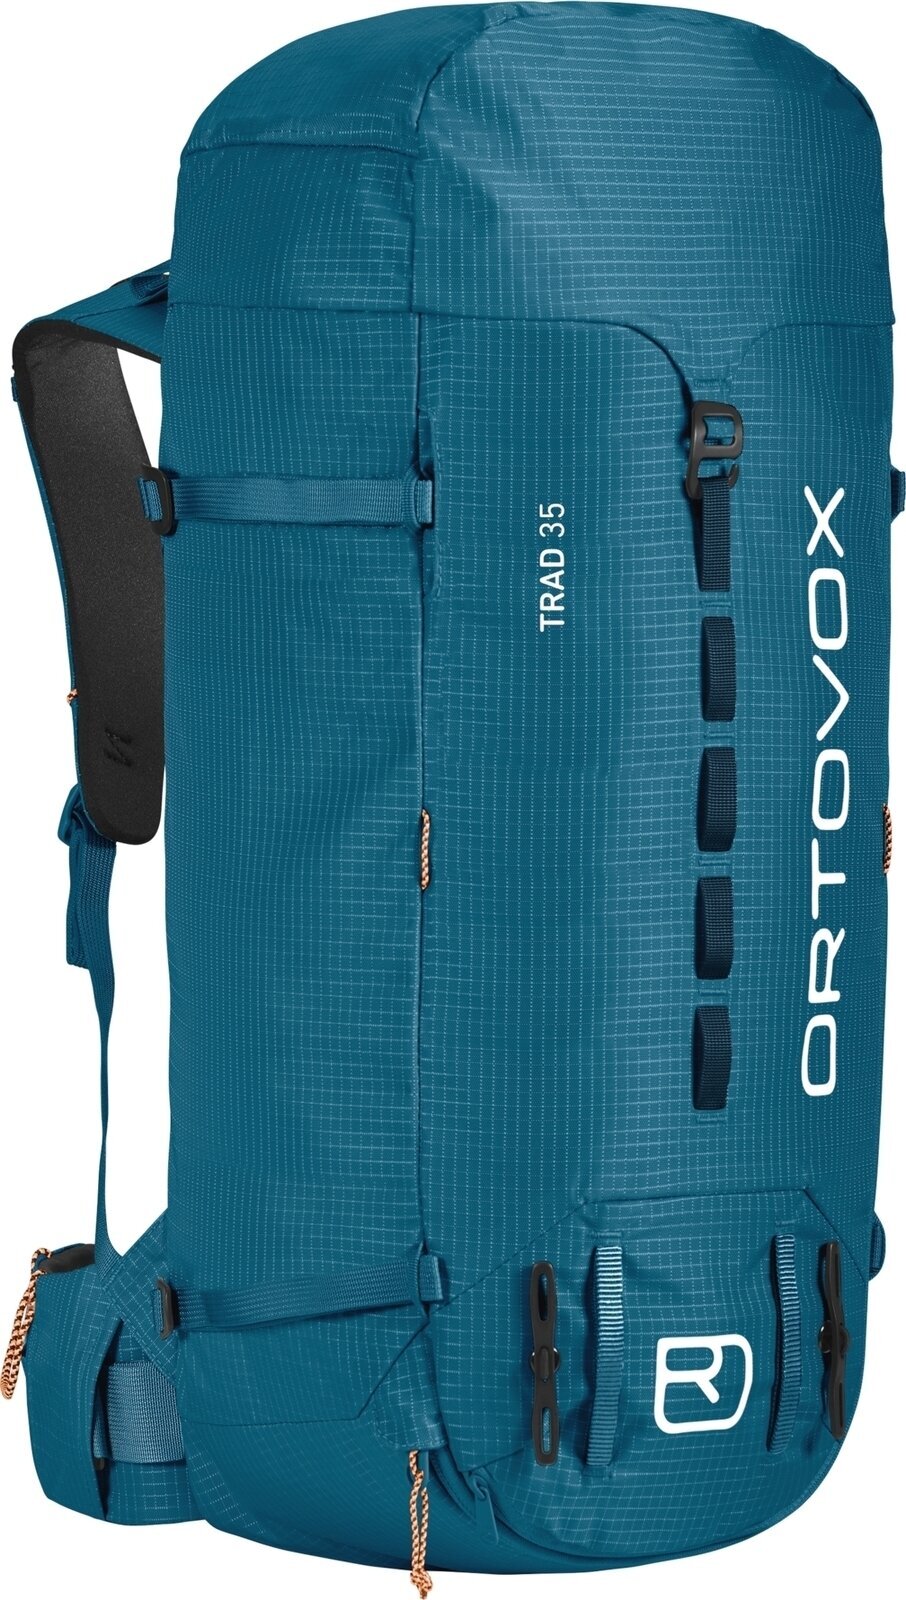 Outdoor Backpack Ortovox Trad 35 Outdoor Backpack